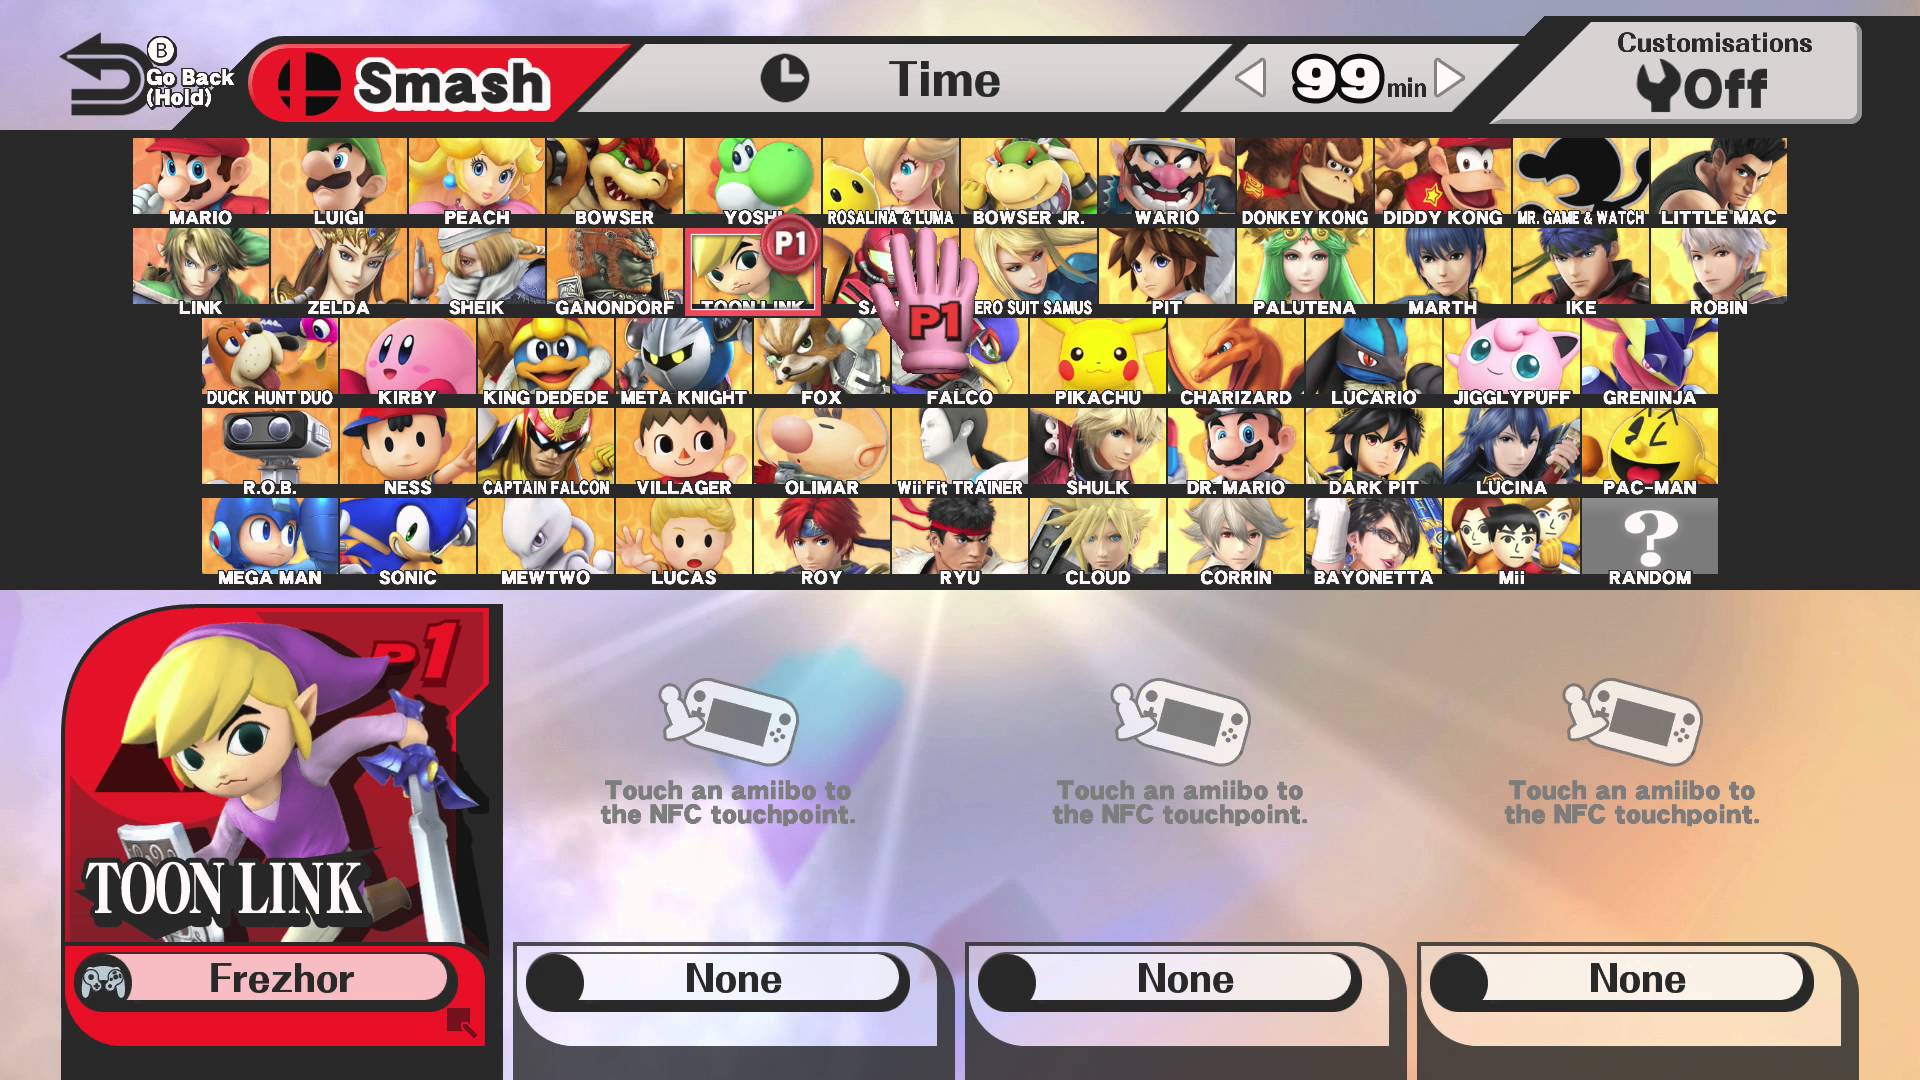 Image All Characters From Super Smash Bros For Wii U Regular Show Fanon Wiki Fandom 6880